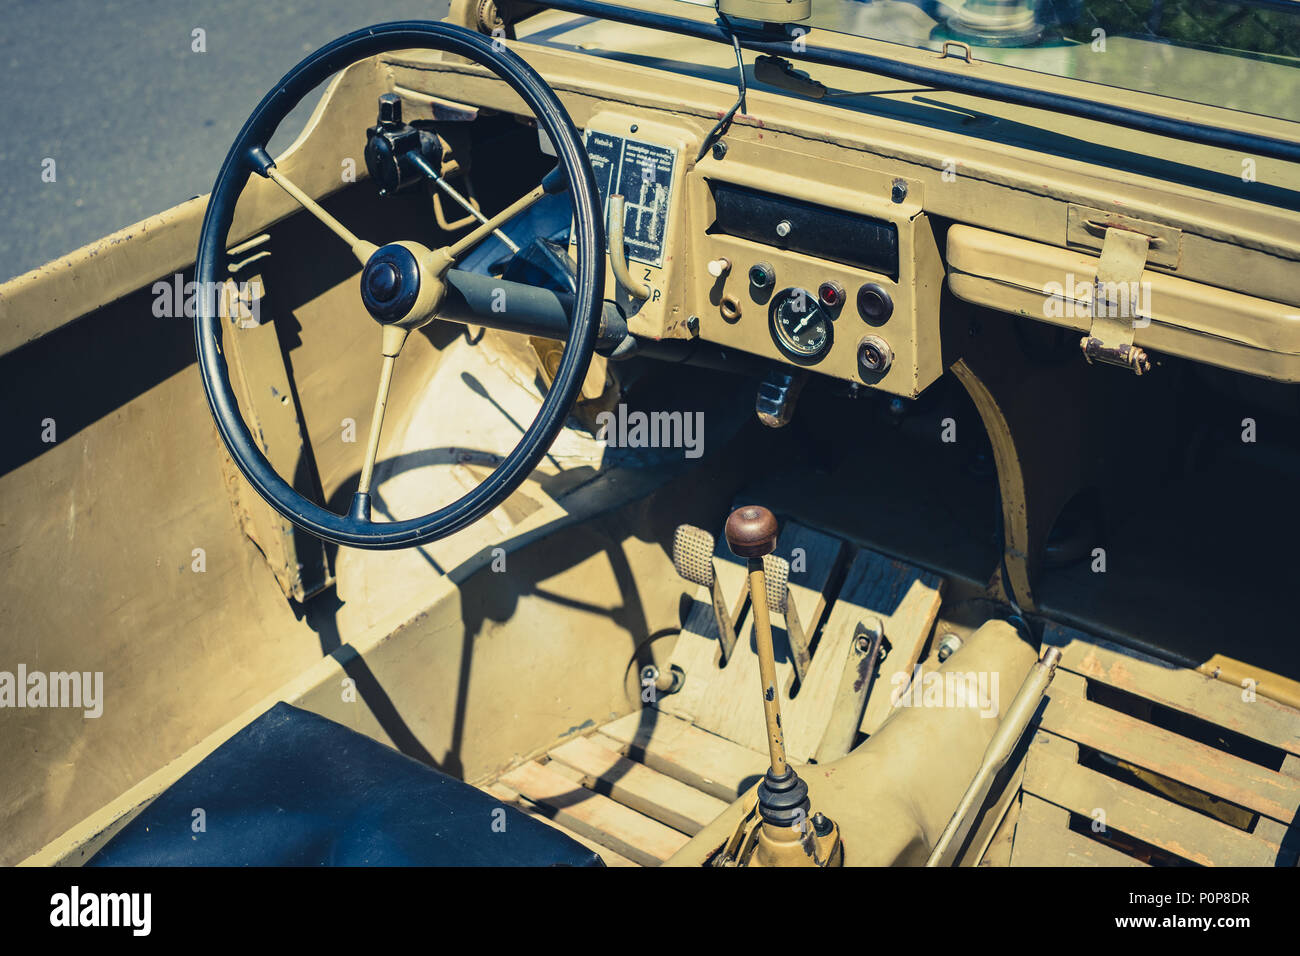 Berlin, Germany - june 09, 2018: Steering wheel, dashboard and interior of  old  Jeep car cockpit at Classic Days, a Oldtimer  event for vintage cars  Stock Photo